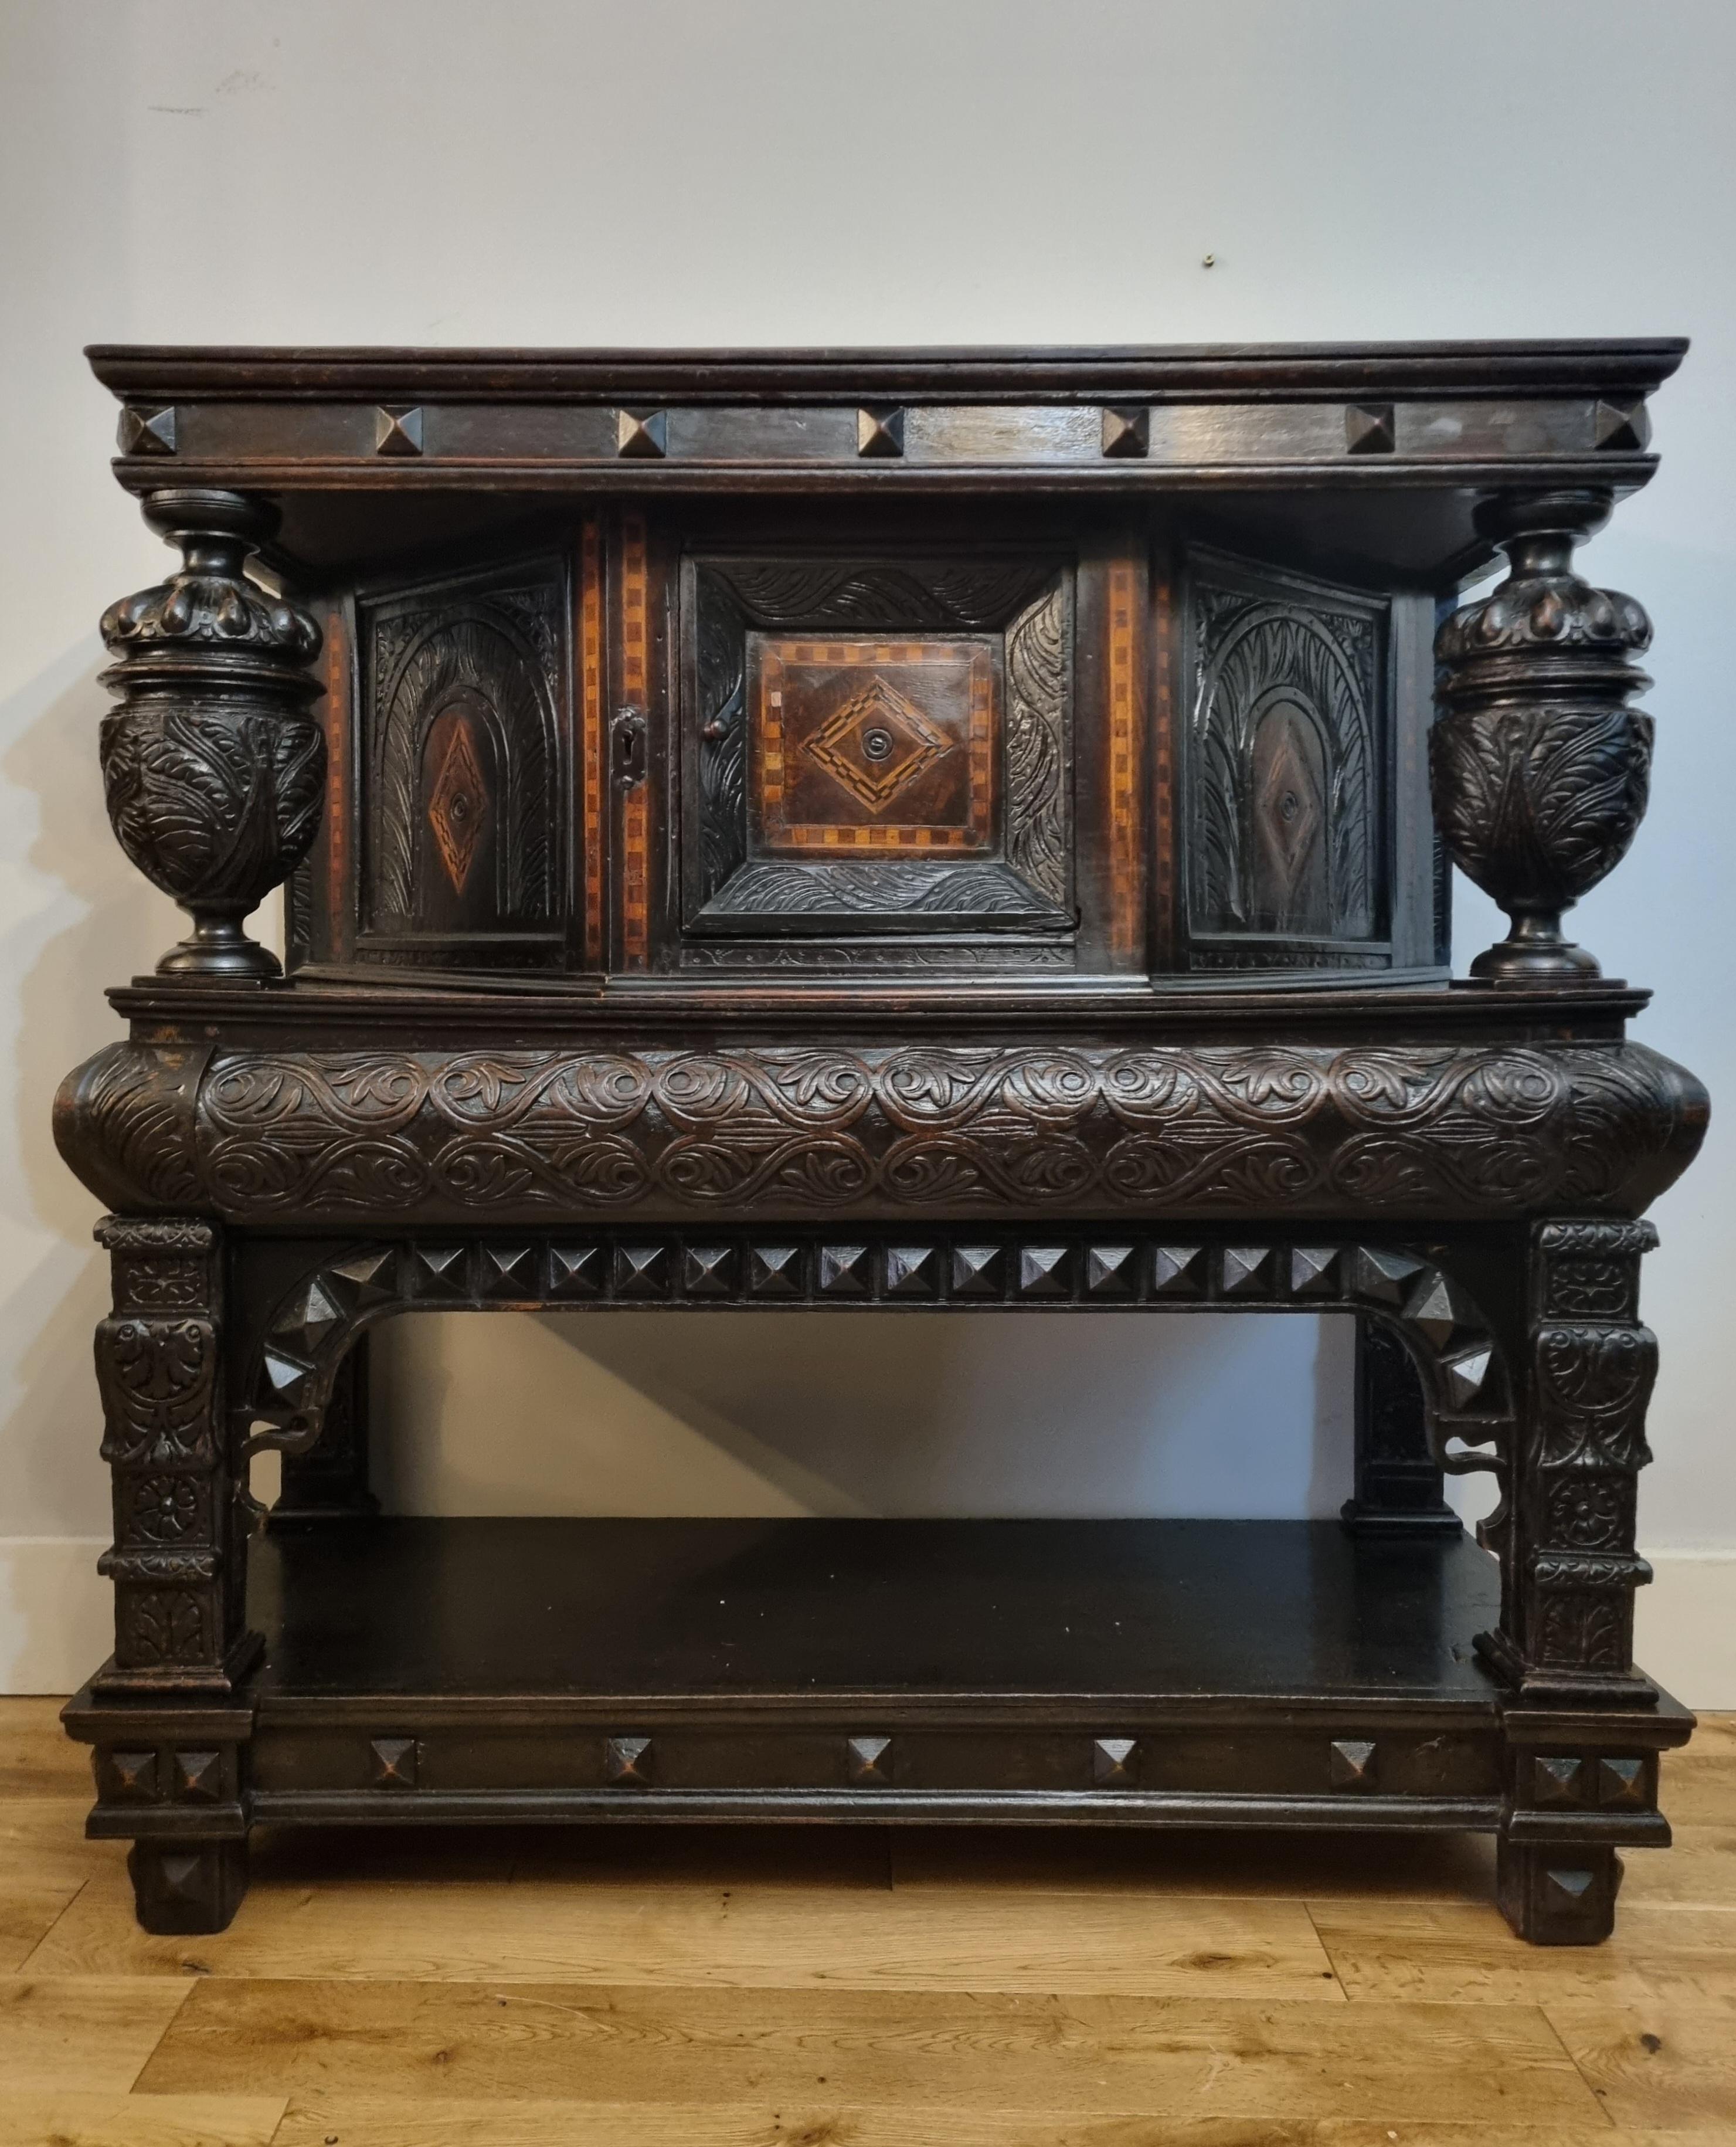 A superb Elizabethan inlaid oak livery cupboard, dating to 1570-1590, of desirable small proportions. An extremely rare example, beautifully carved and featuring intricate inlay work, geometric arch moulding, wonderfully carved cup and cover